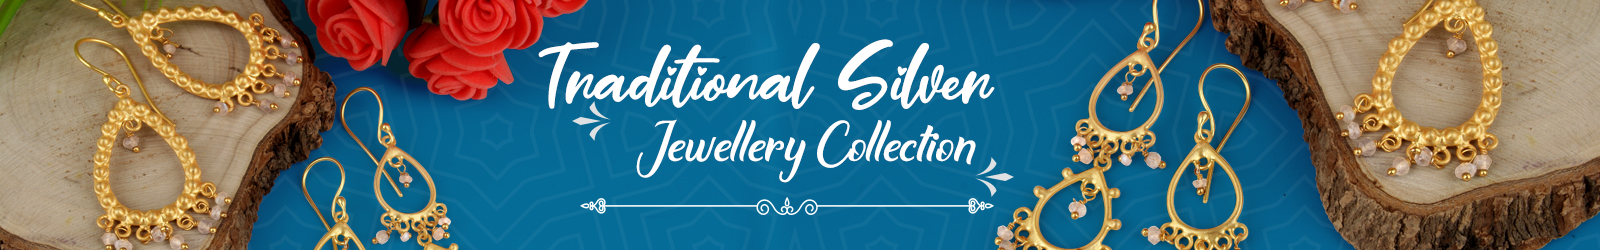 Wholesale Traditional Silver Jewelry Collection Manufacturer In India